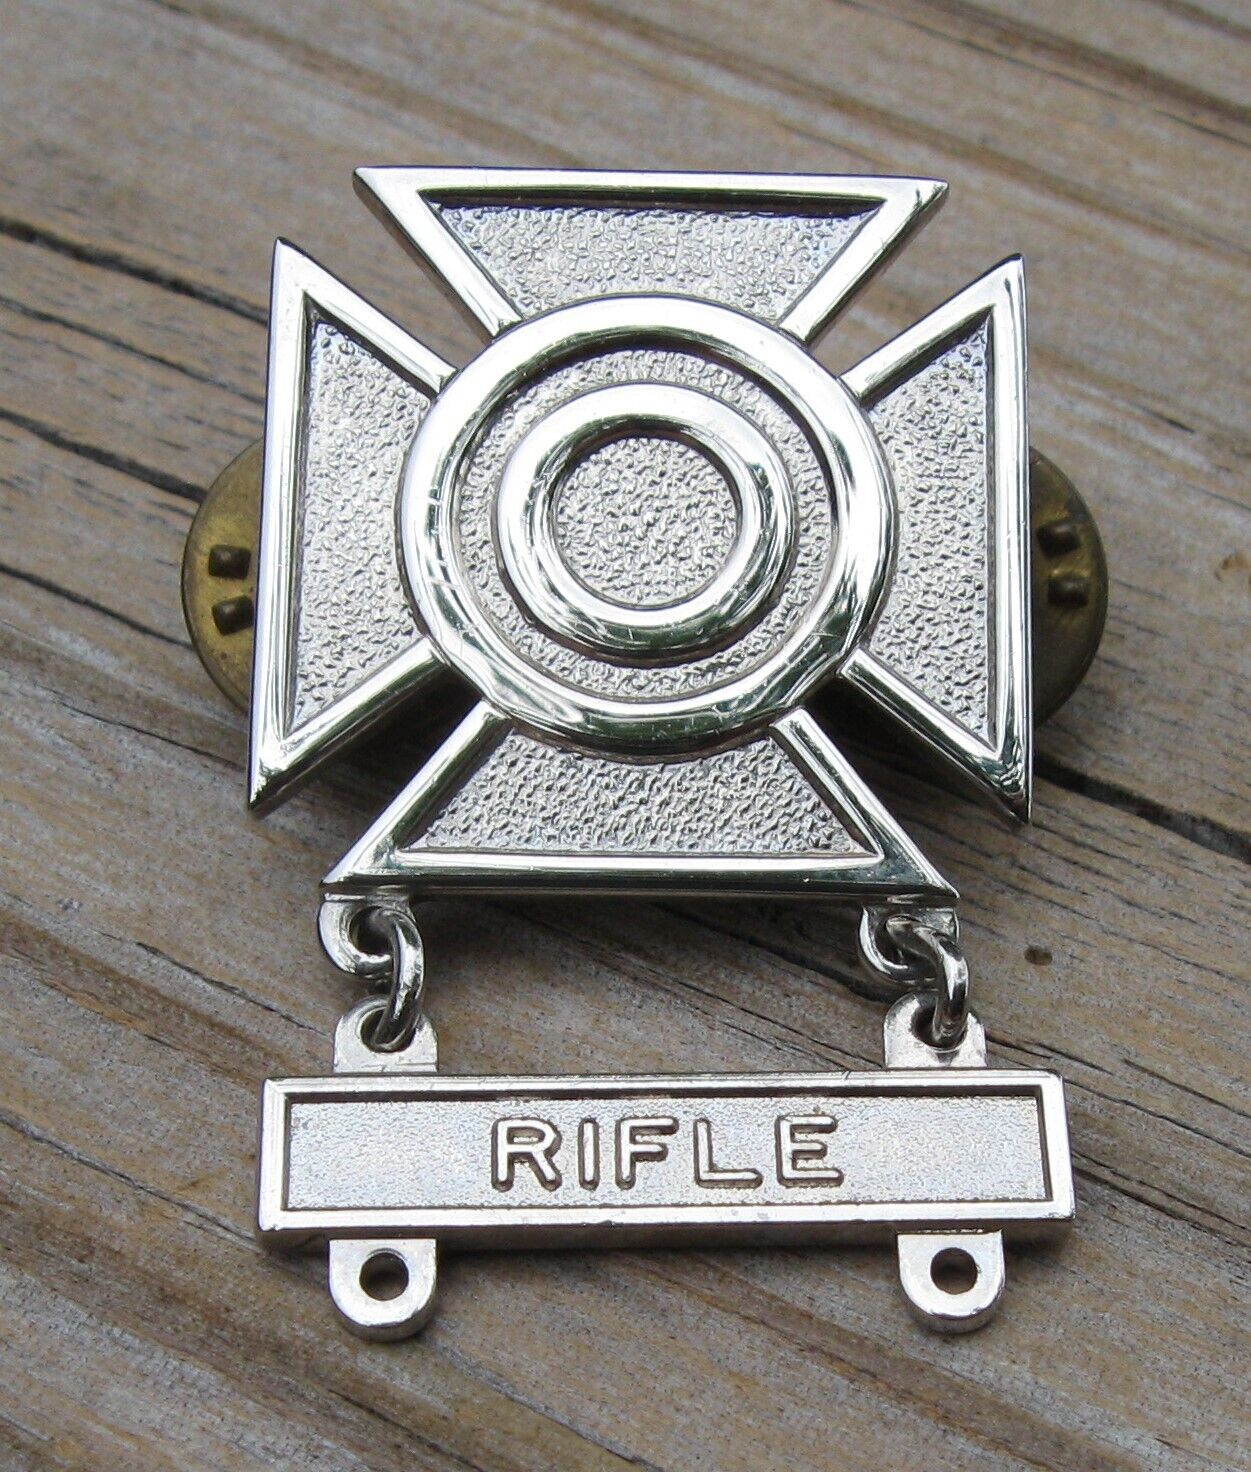 U.S. Army Qualification Sharpshooter Badge with Rifle Bar Shiny Brite